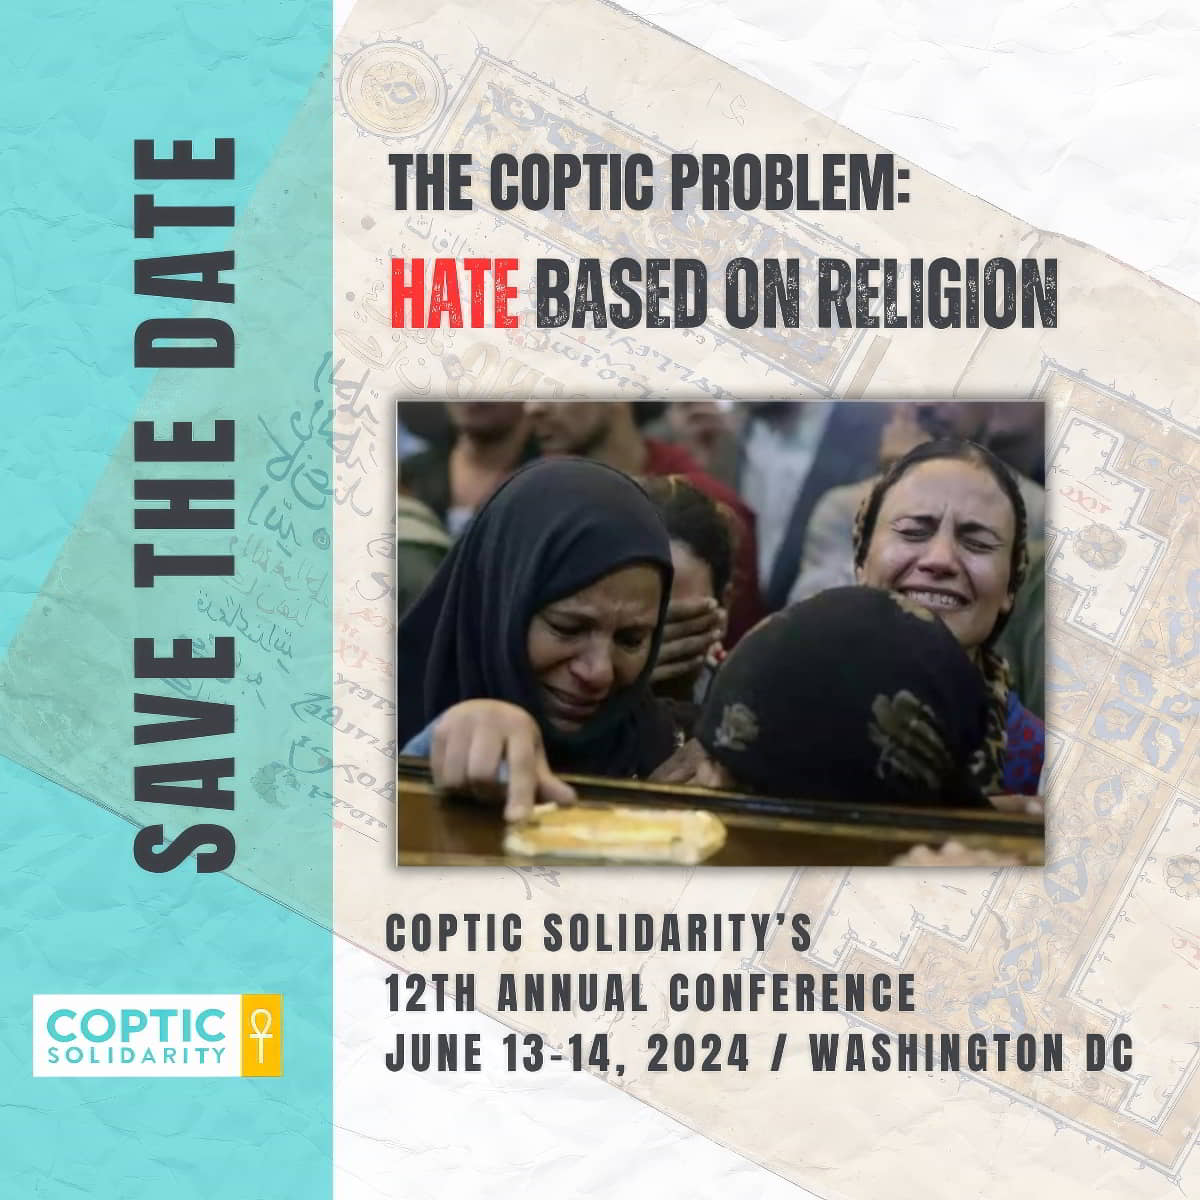 Coptic Solidarity to Host 12th Annual Conference